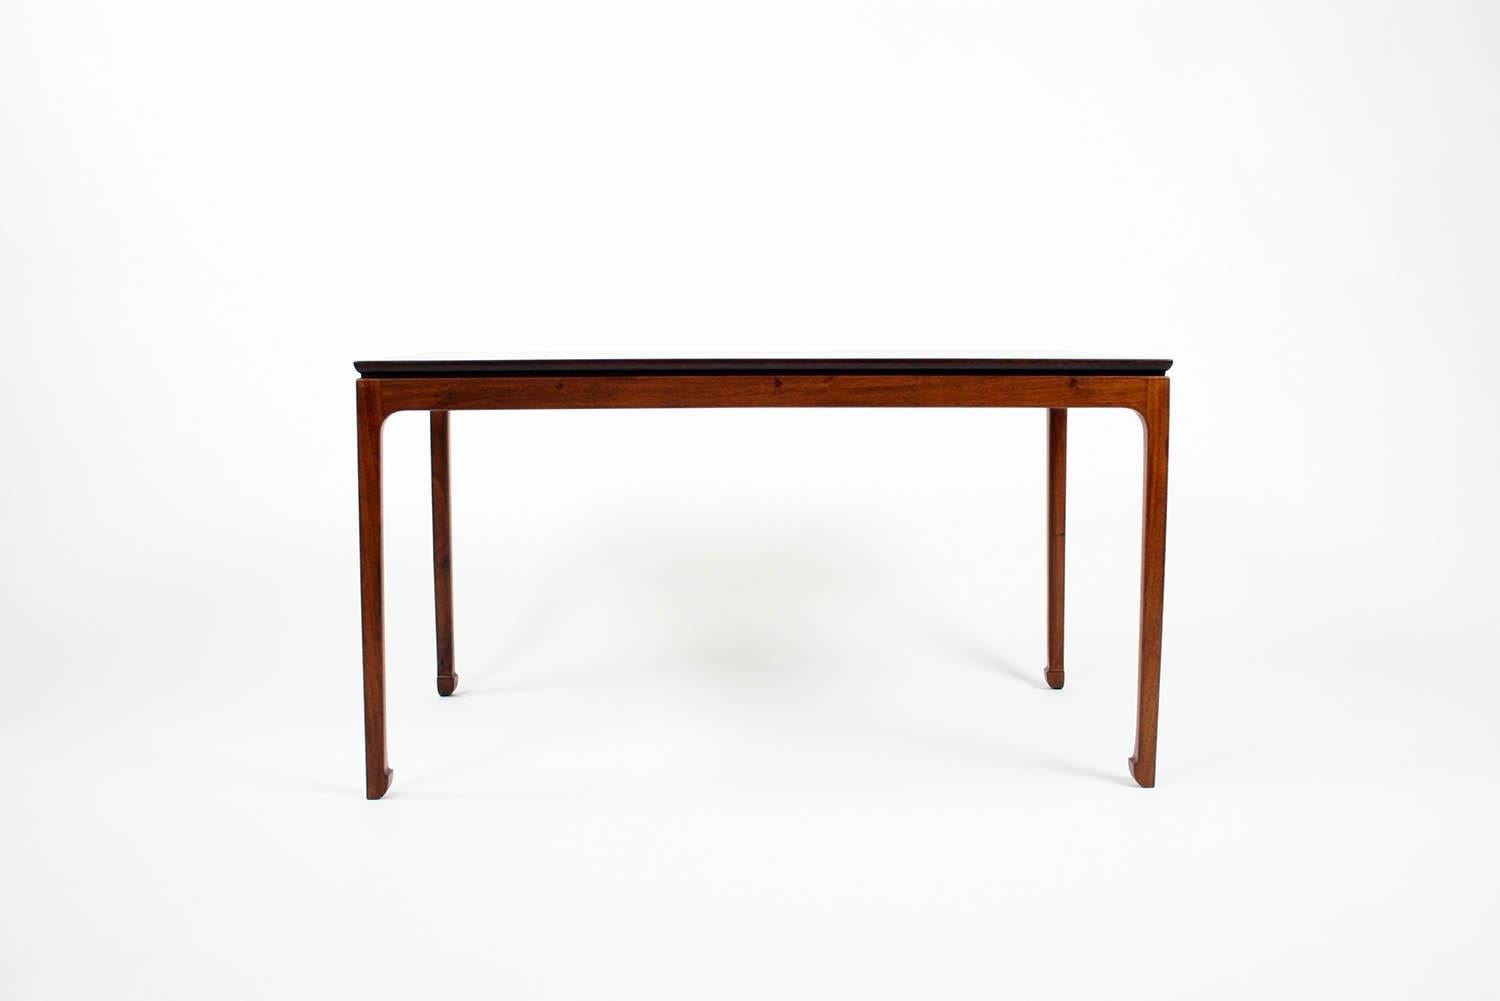 Ole Wanscher coffee table in Cuban mahogany executed by cabinetmaker A. J. Iversen, Denmark in 1956. Excellent condition.